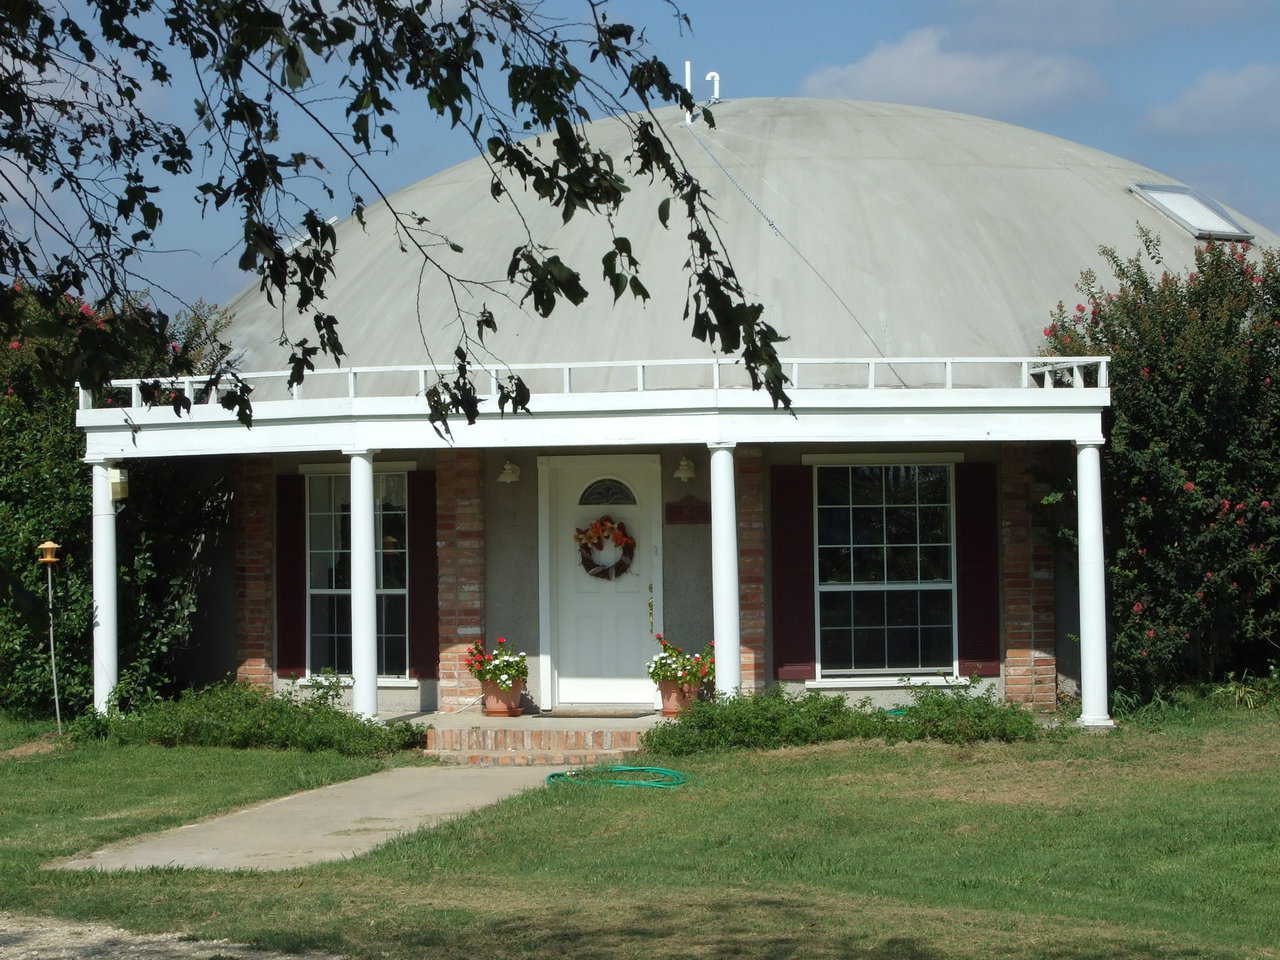 The Orion Two-Story Concrete Dome Home